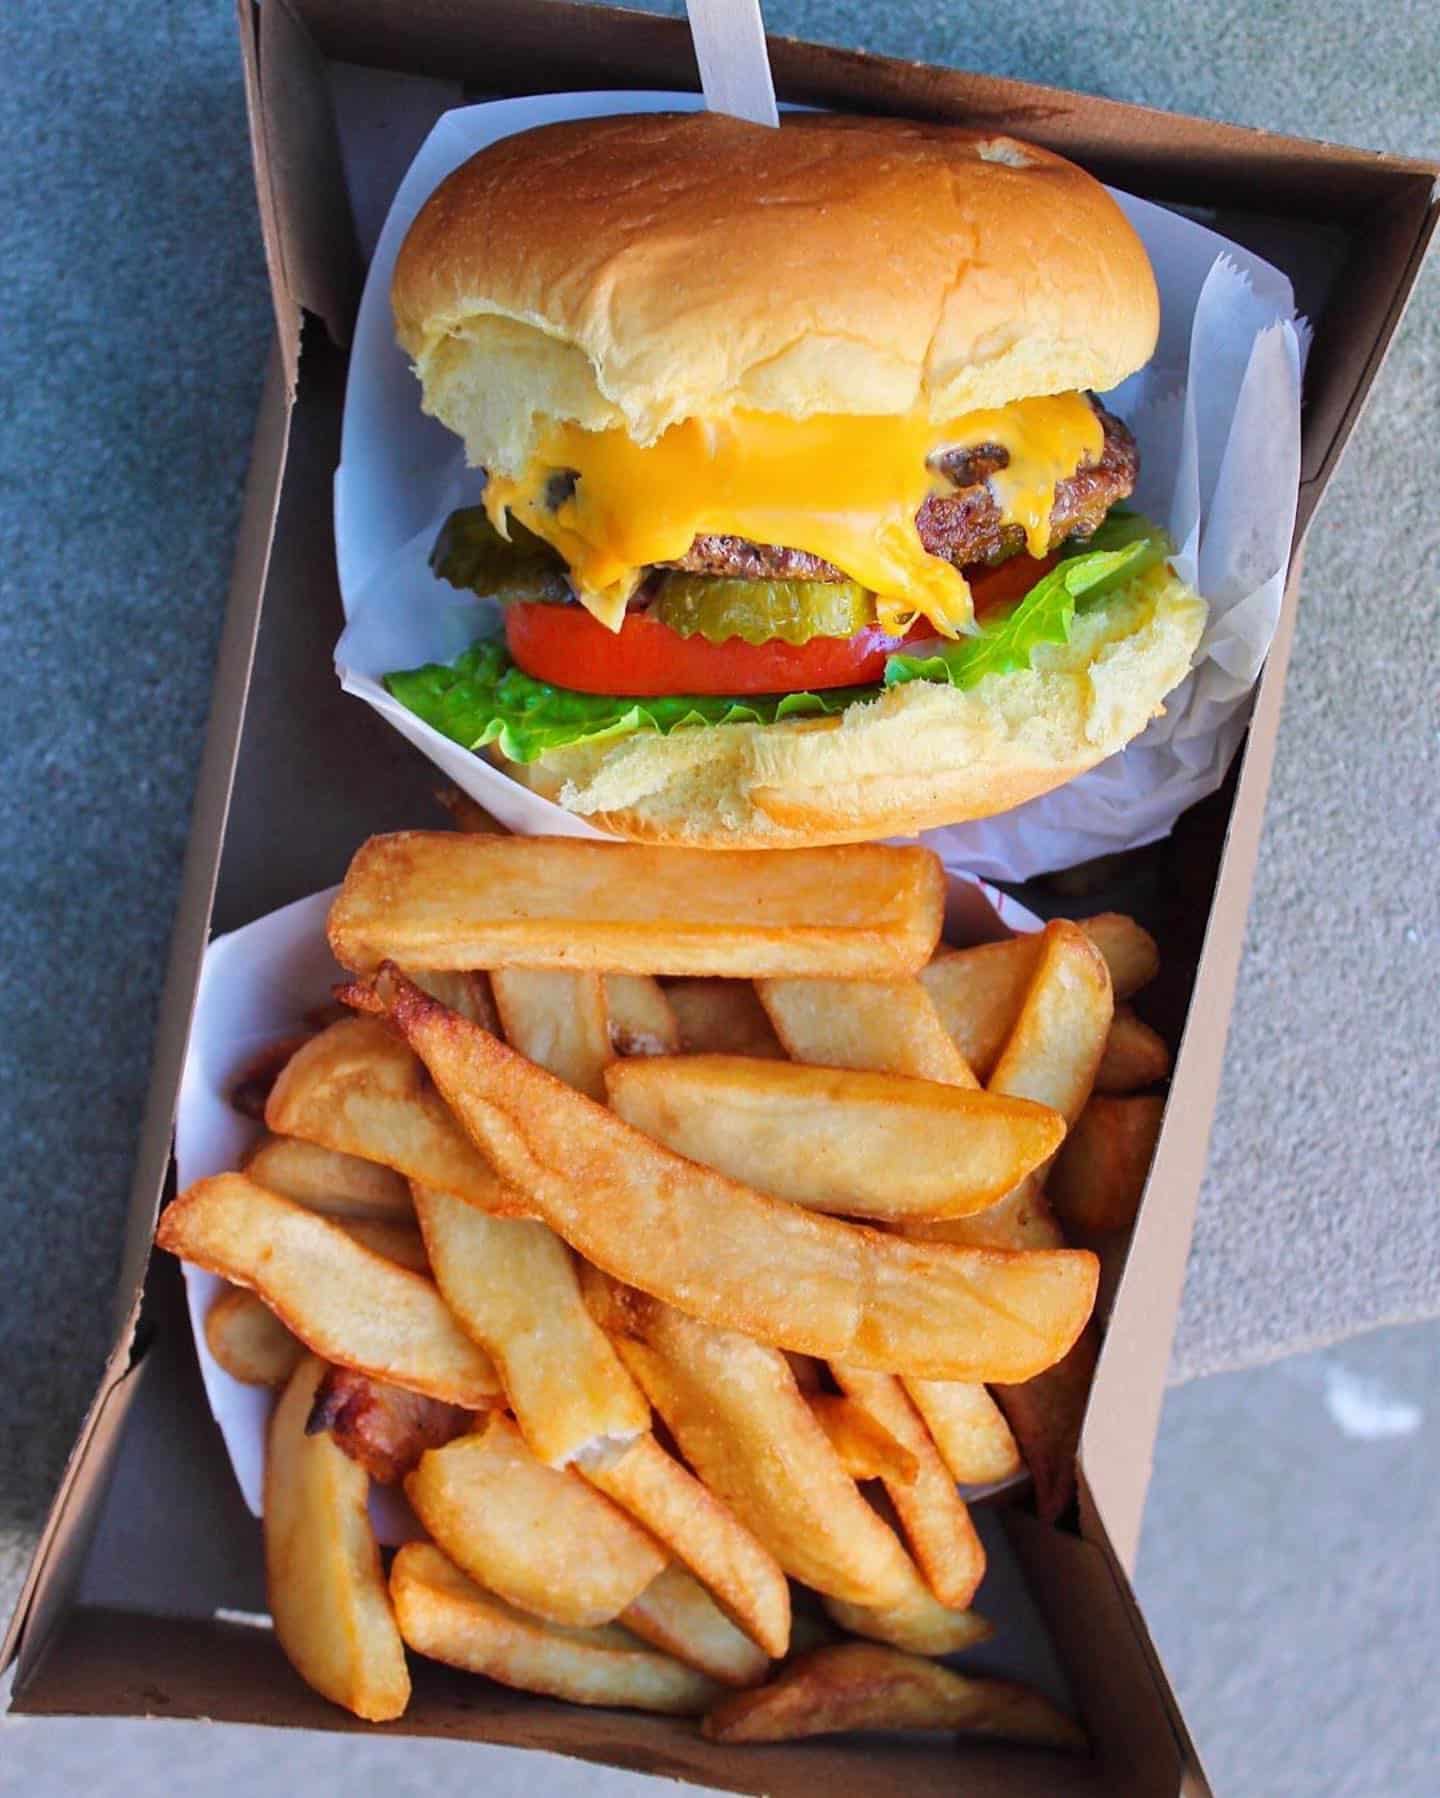 Cheese Burger and Fries